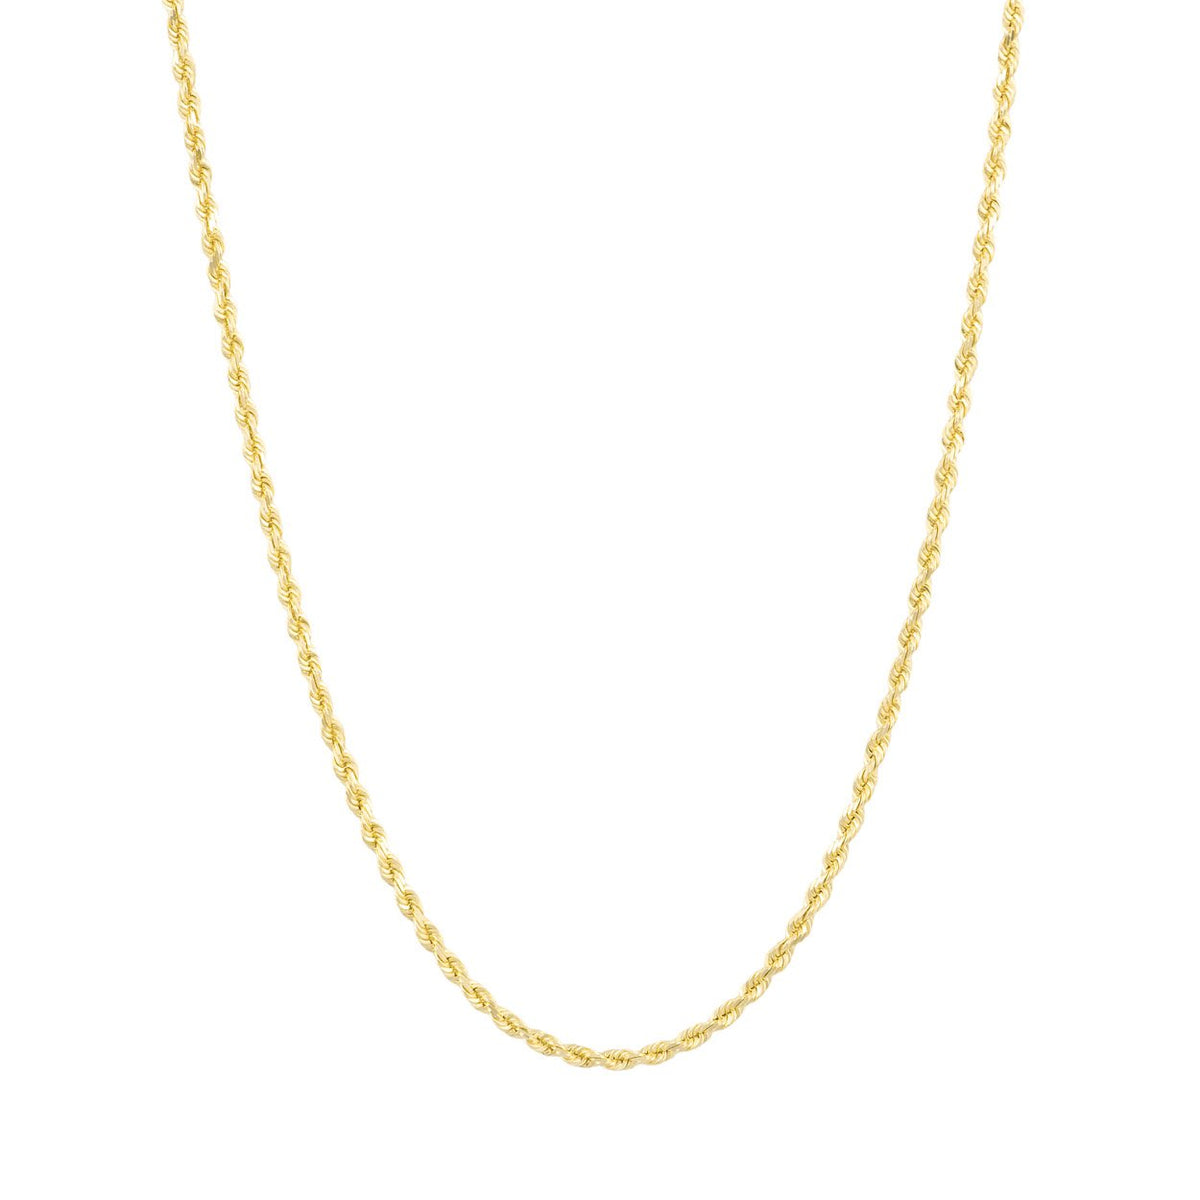 SOLID GOLD DIAMOND-CUT ROPE CHAIN